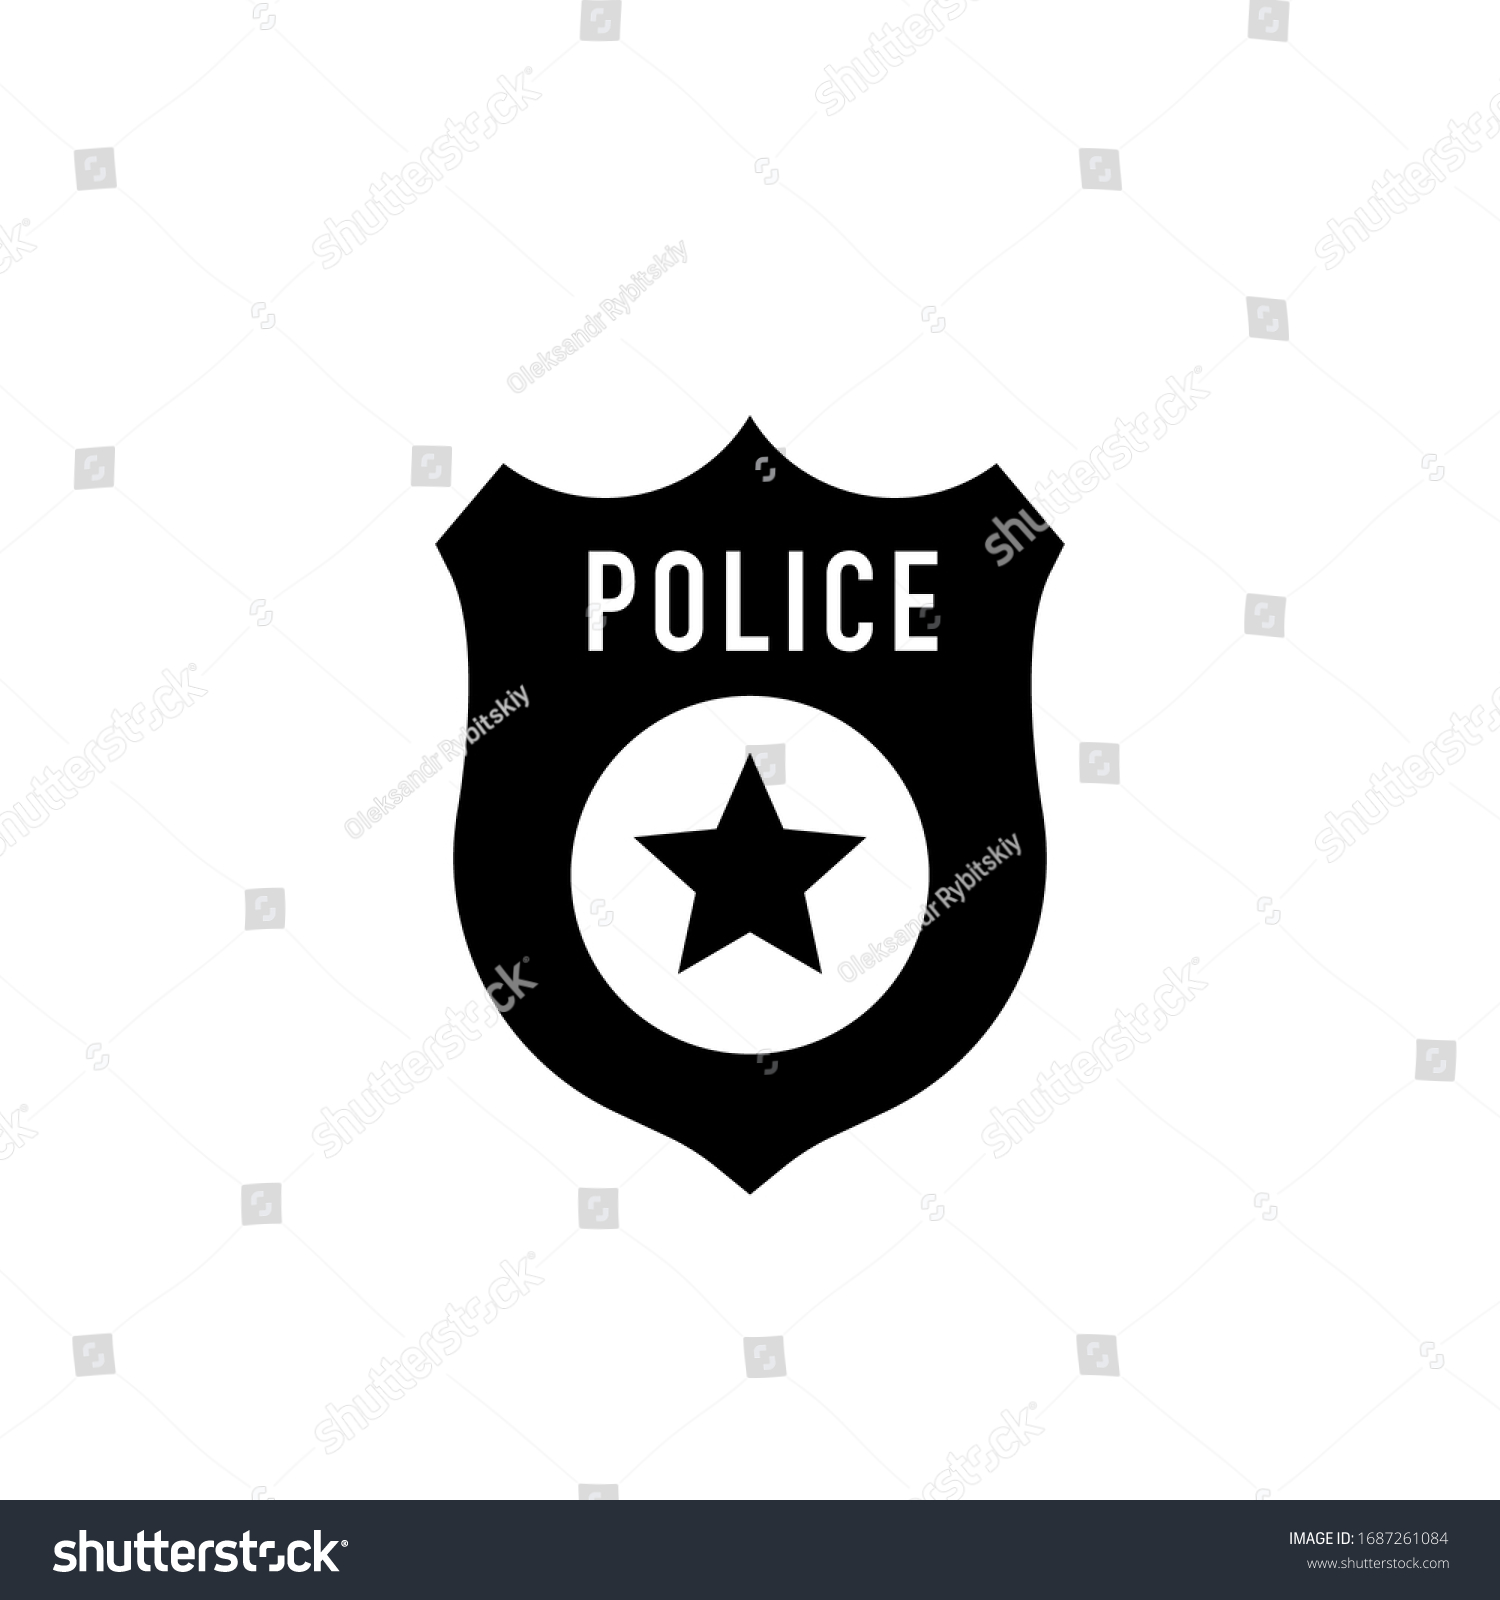 SVG of Police badge vector icon illustration isolated on black background svg